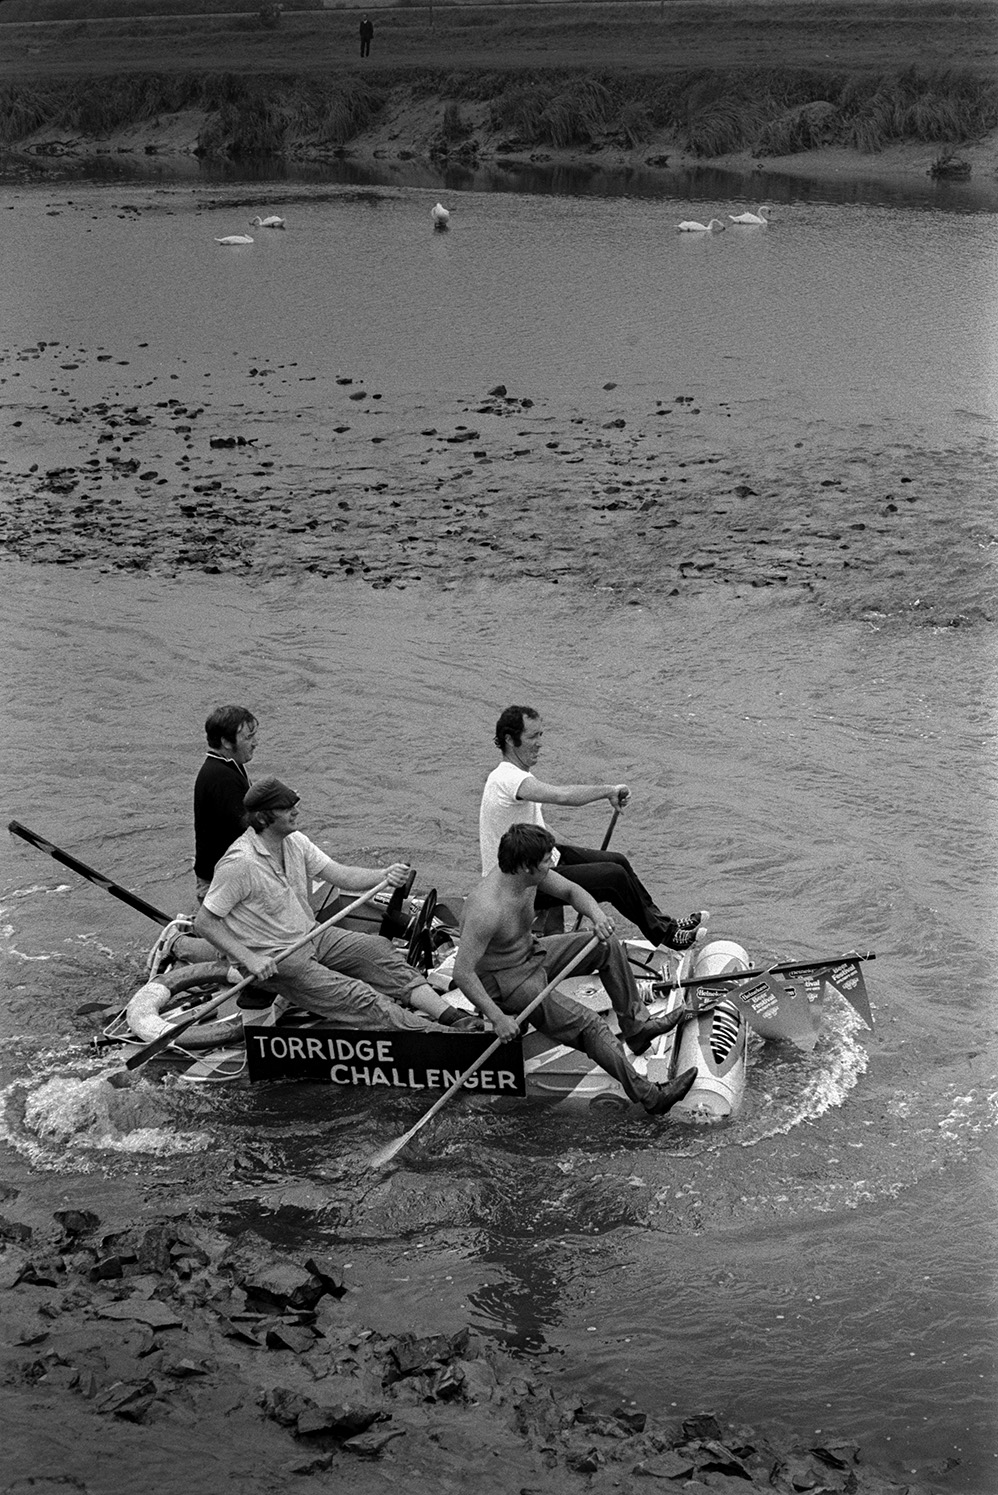 Four men rowing a homemade raft called the 'Torridge Challenger' in the Barnstaple Raft Race in Rock Park, Barnstaple. Swans can be seen on the water in the background.